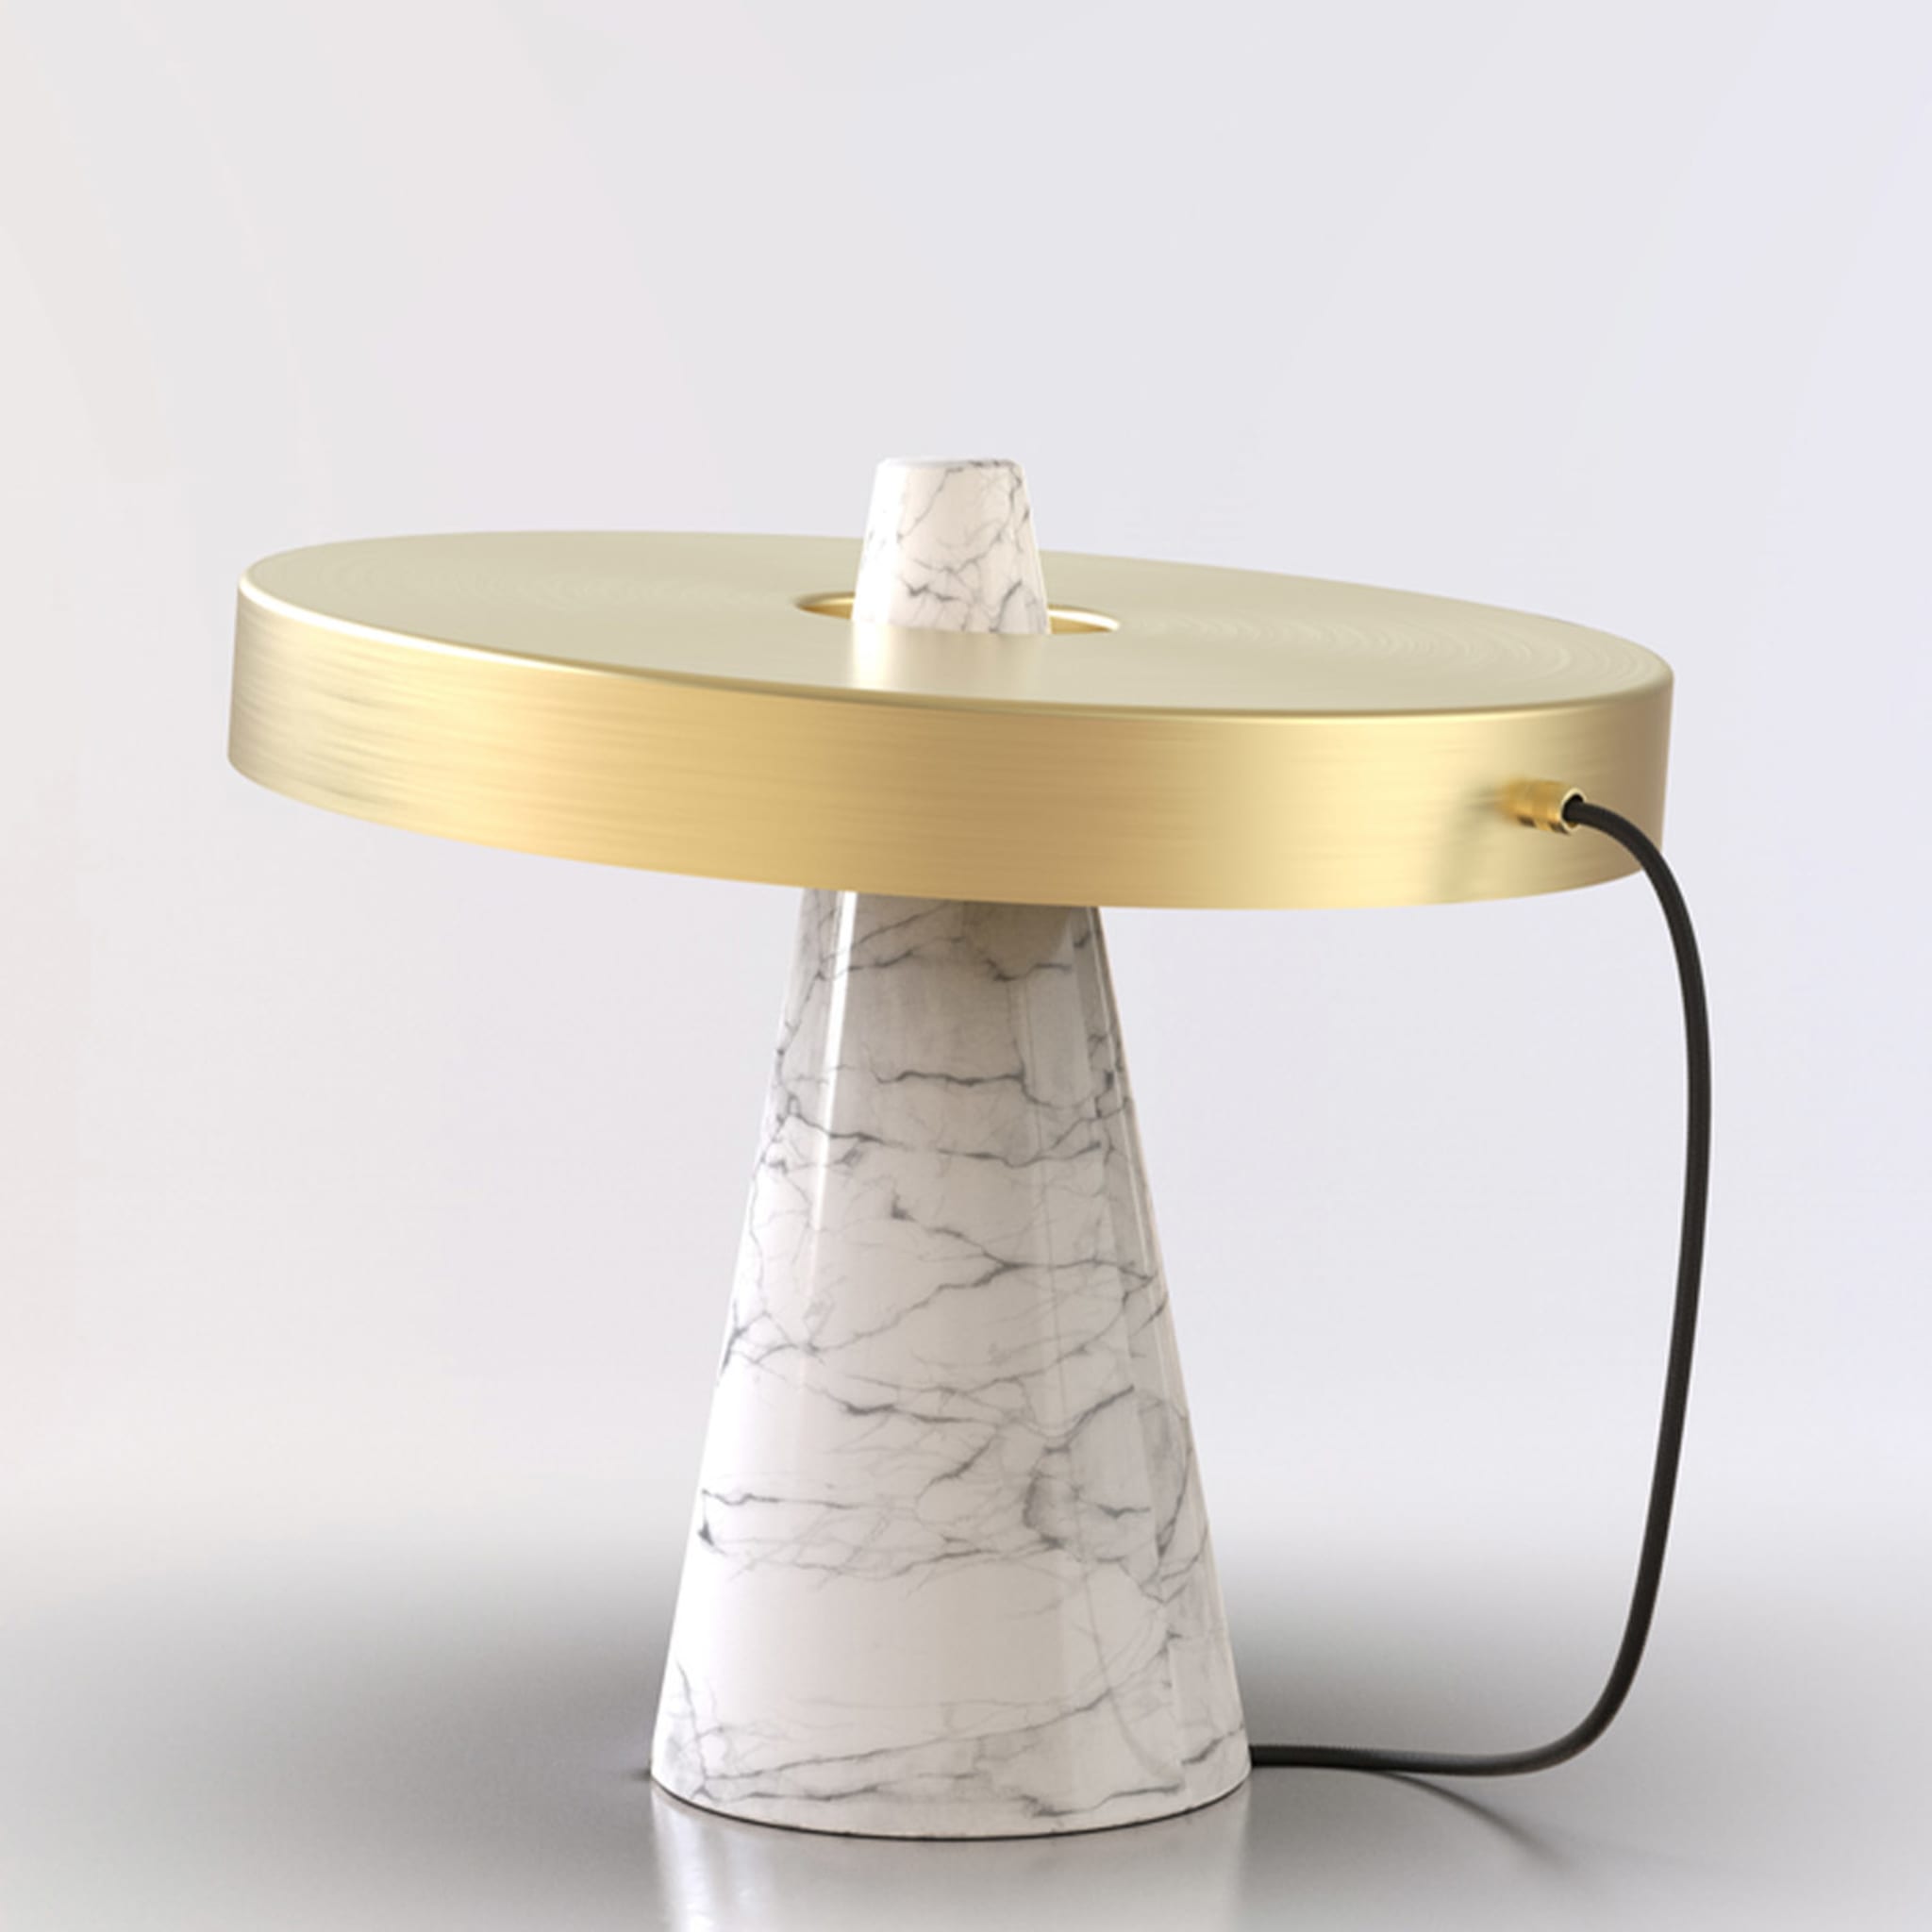 ED039 White Stone and Brass Table Lamp - Alternative view 1